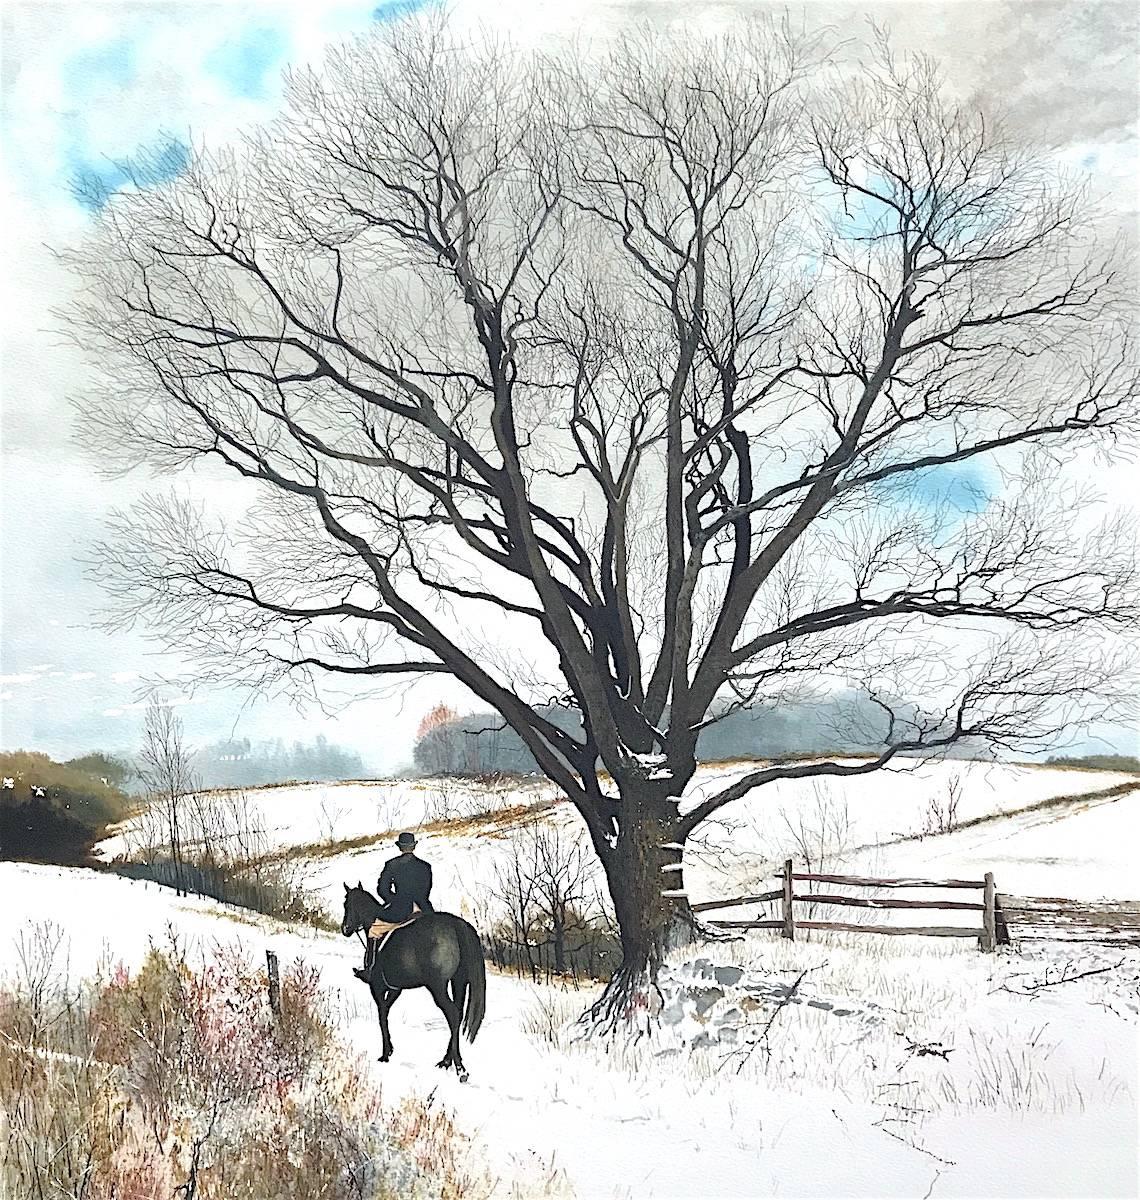 Peter Sculthorpe Landscape Print - Hilltopper, Signed Limited Edition Lithograph, Equestrian English Riding